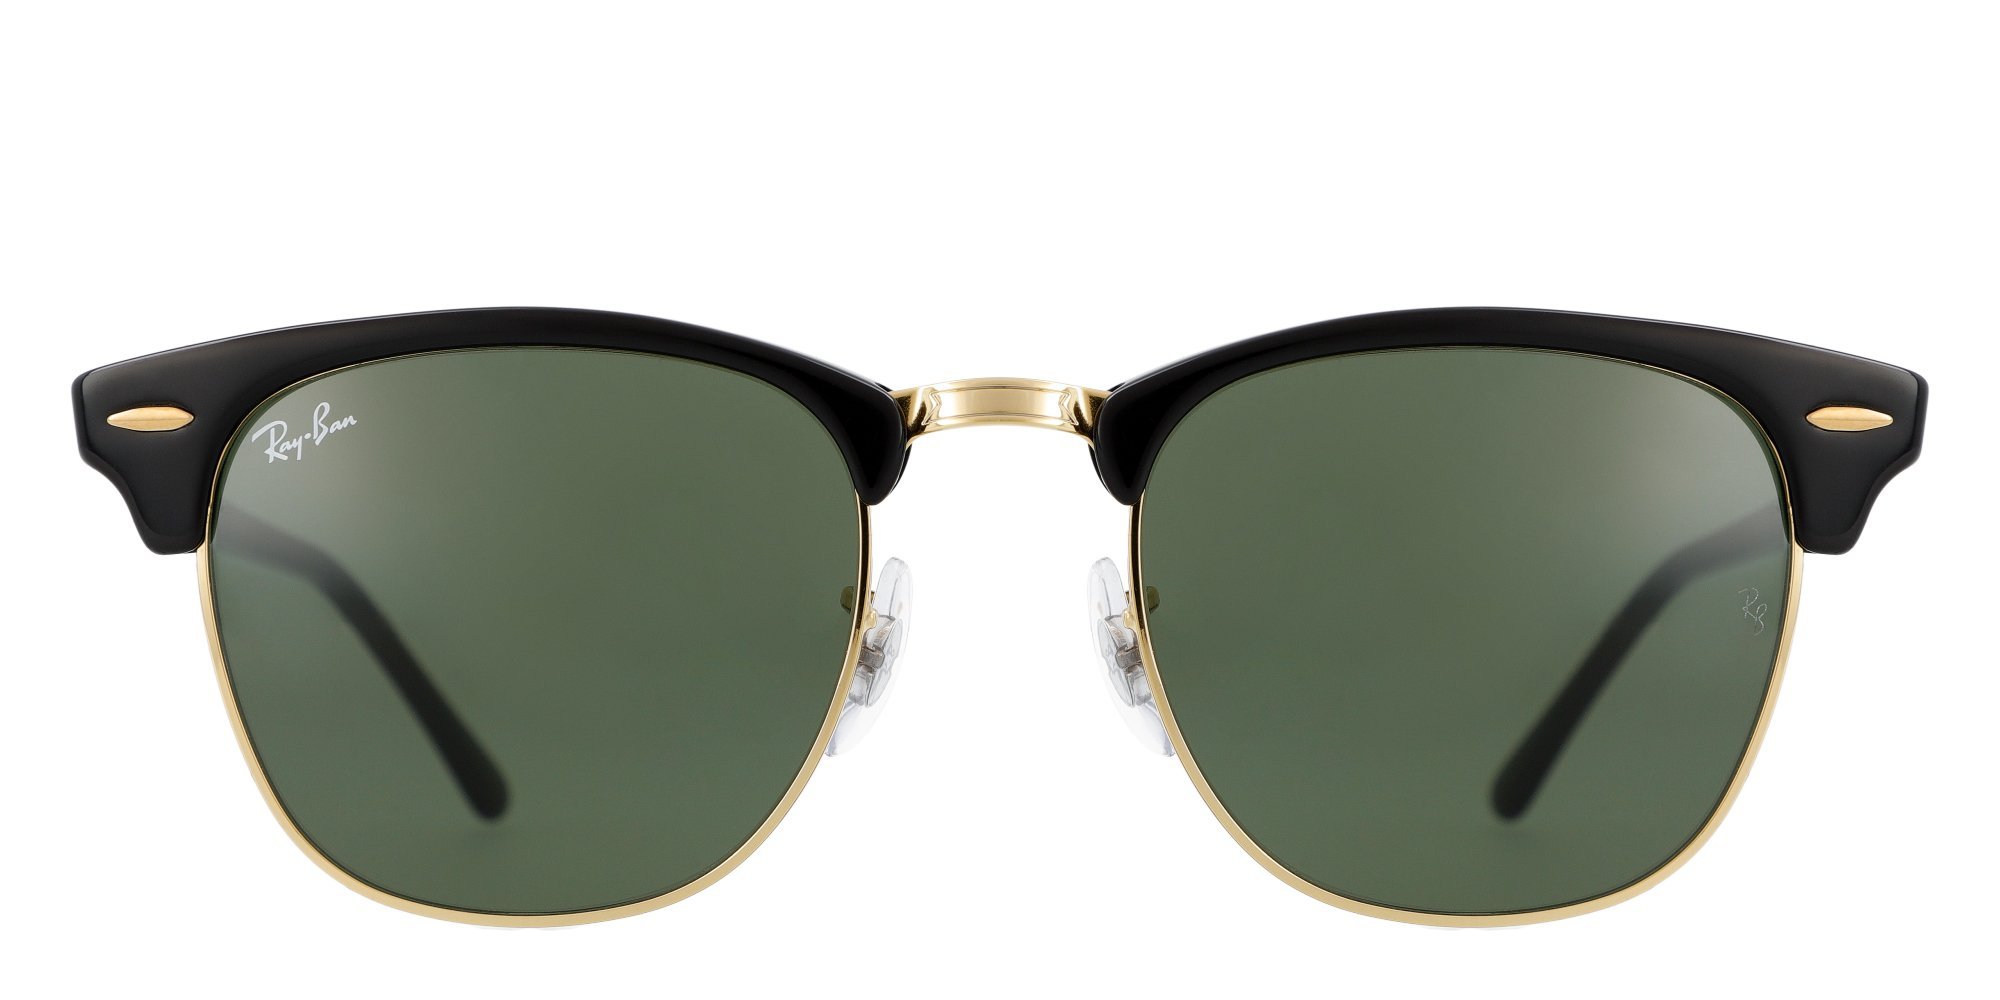 Vintage Ray-Ban Clubmaster Sunglasses RB3016 Black and Gold | Clubmaster  sunglasses, Rayban sunglasses clubmaster, Ray ban clubmaster